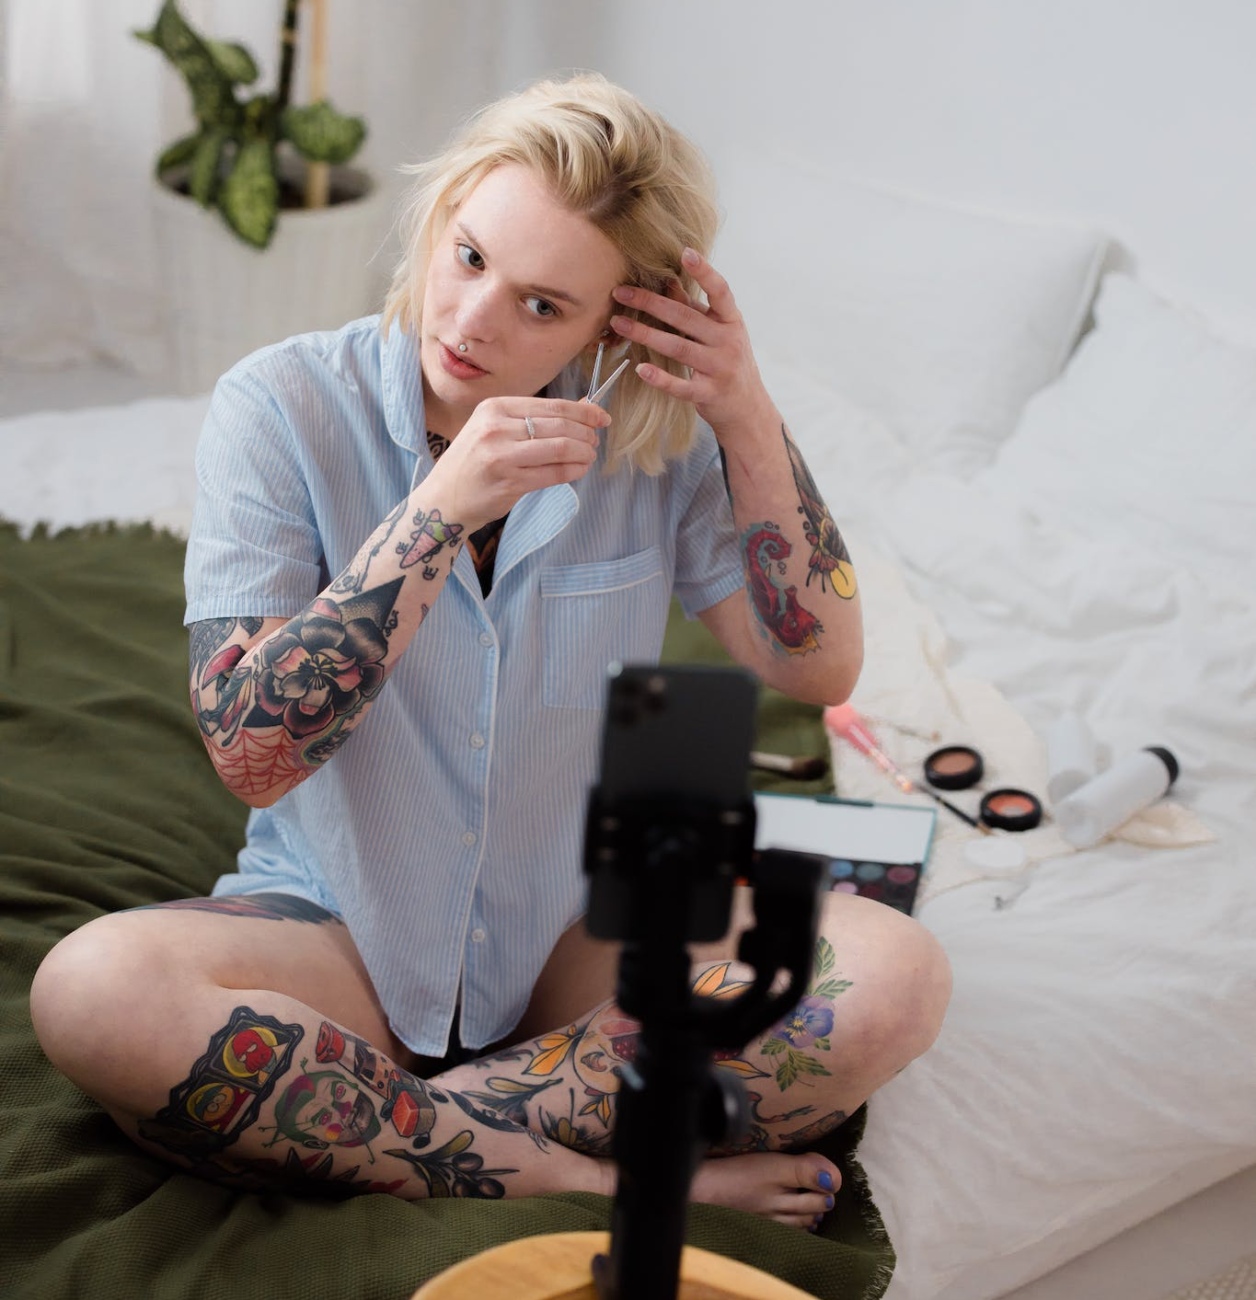 A Tattooed Woman Vlogging on Her Phone while Putting a Clip on Her Hair